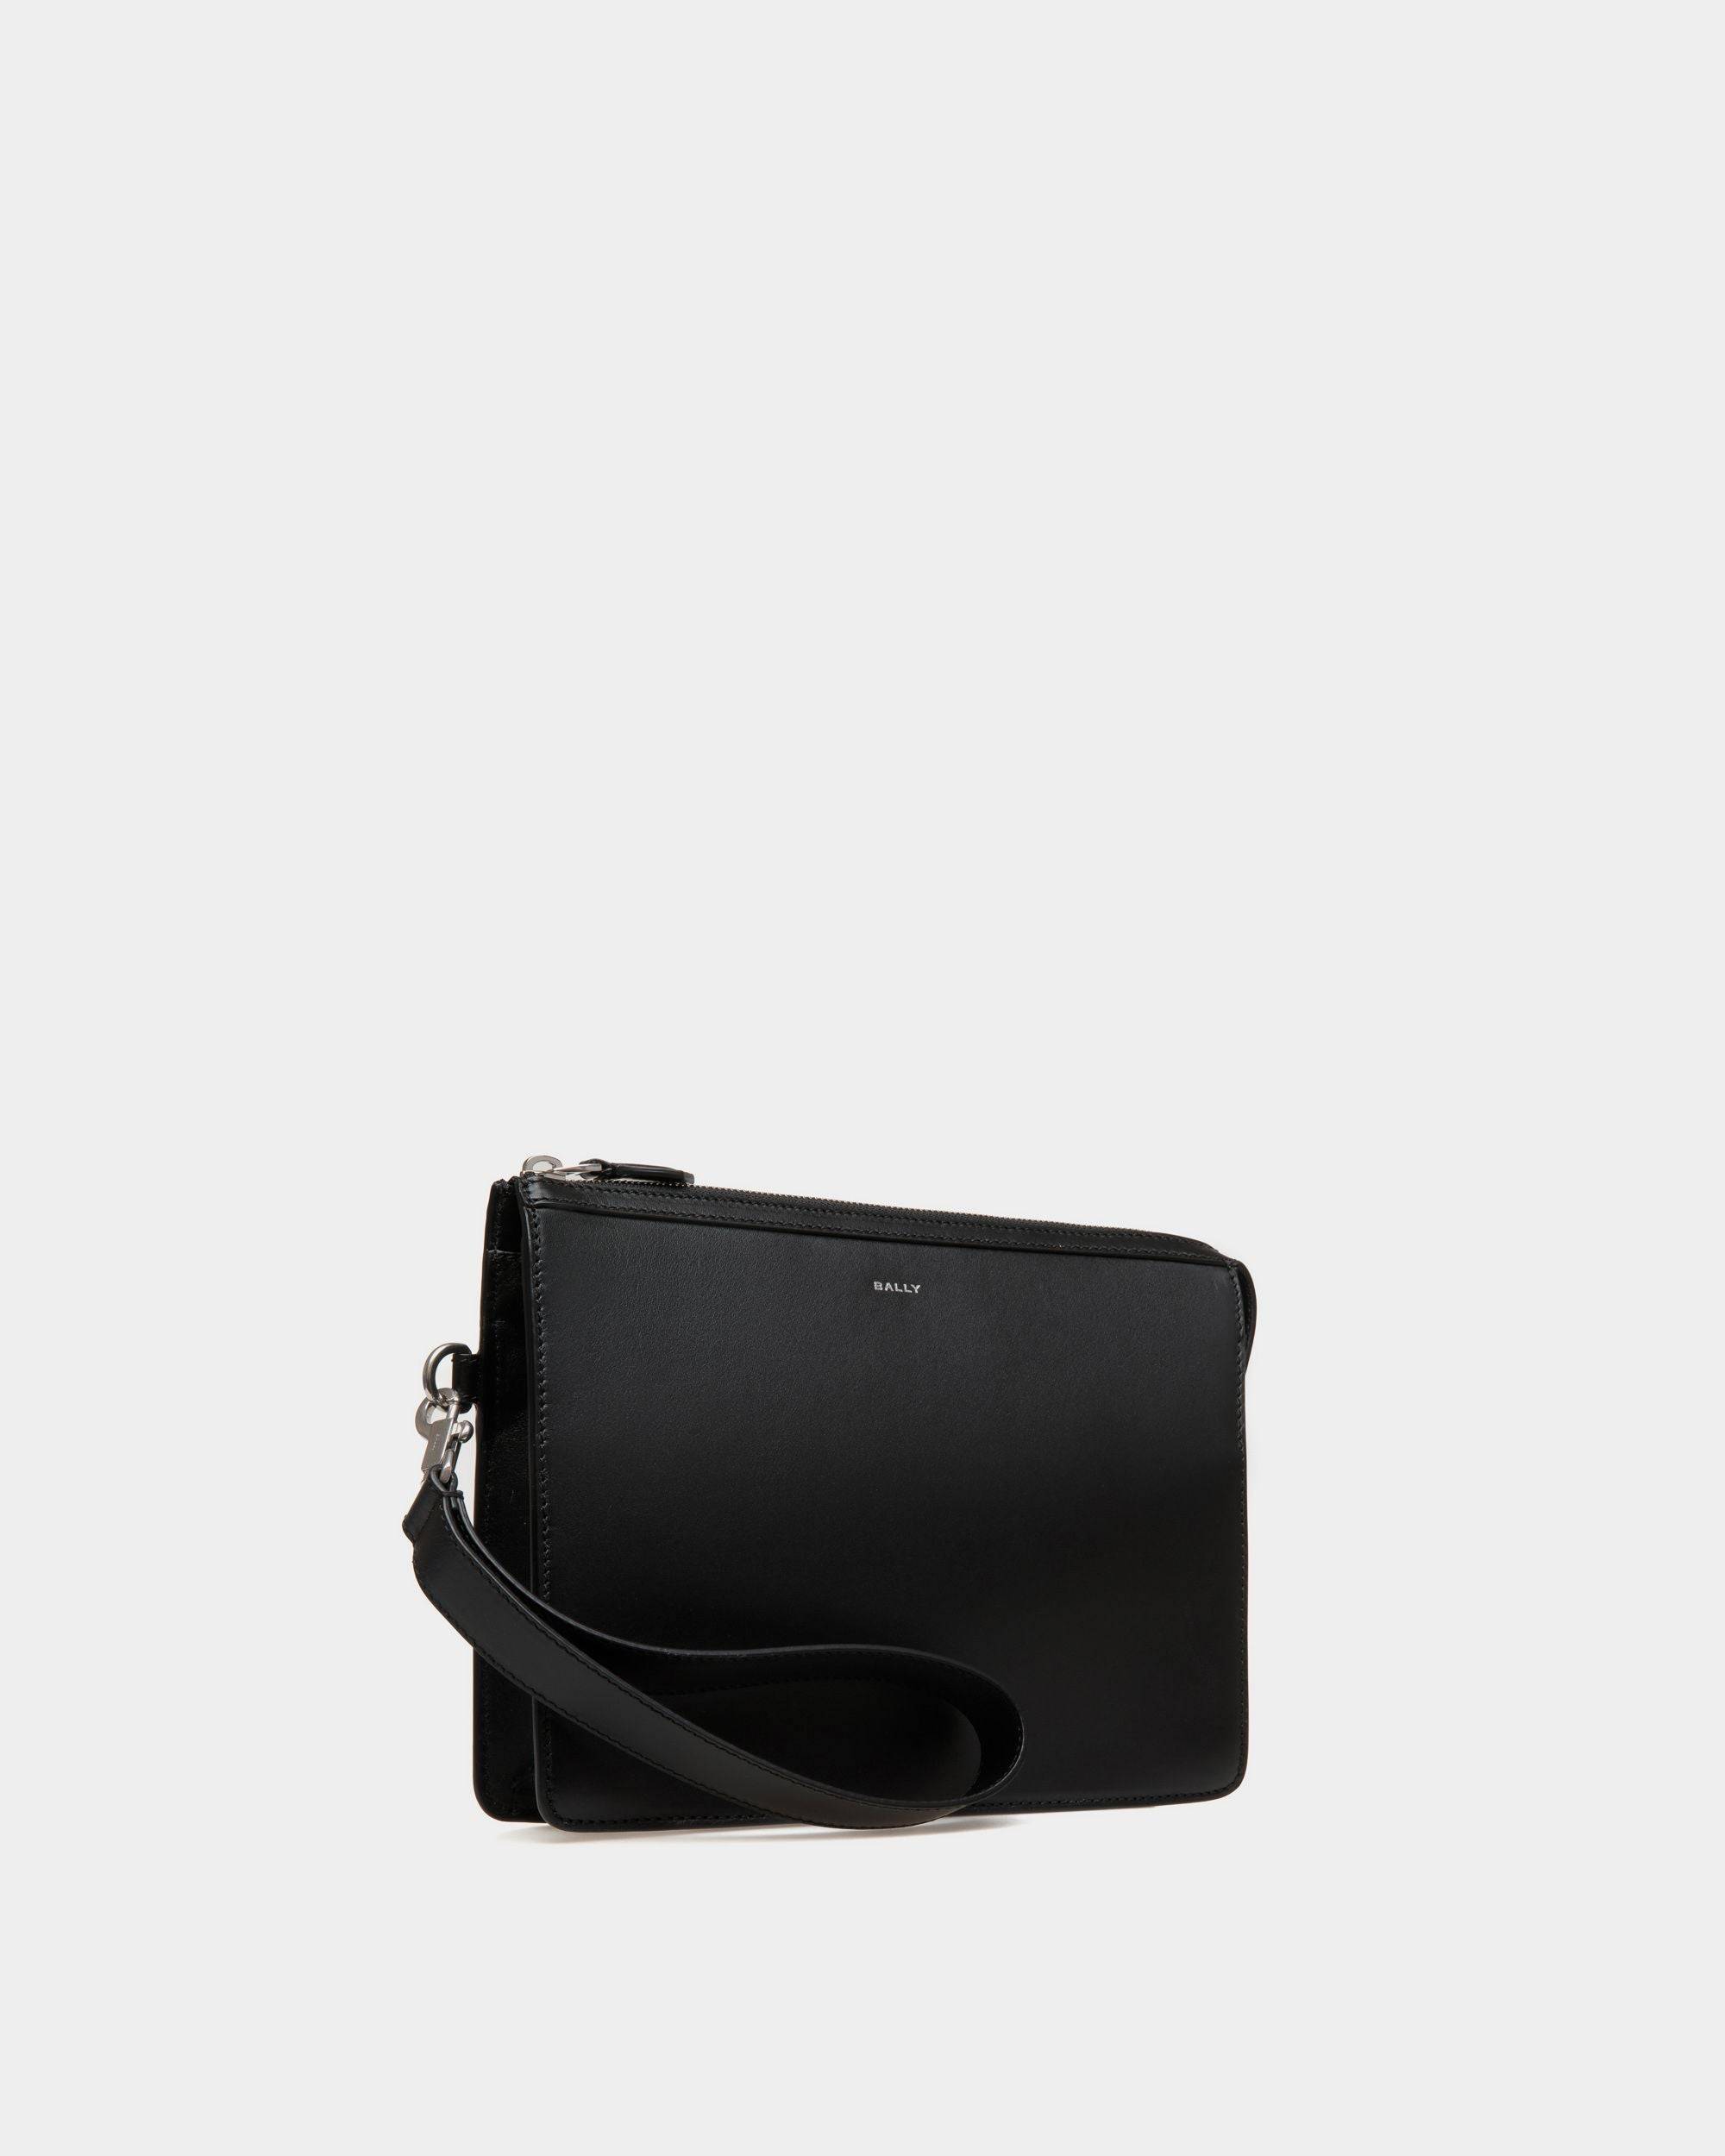 Busy Bally | Men's Pouch in Black Leather | Bally | Still Life 3/4 Front